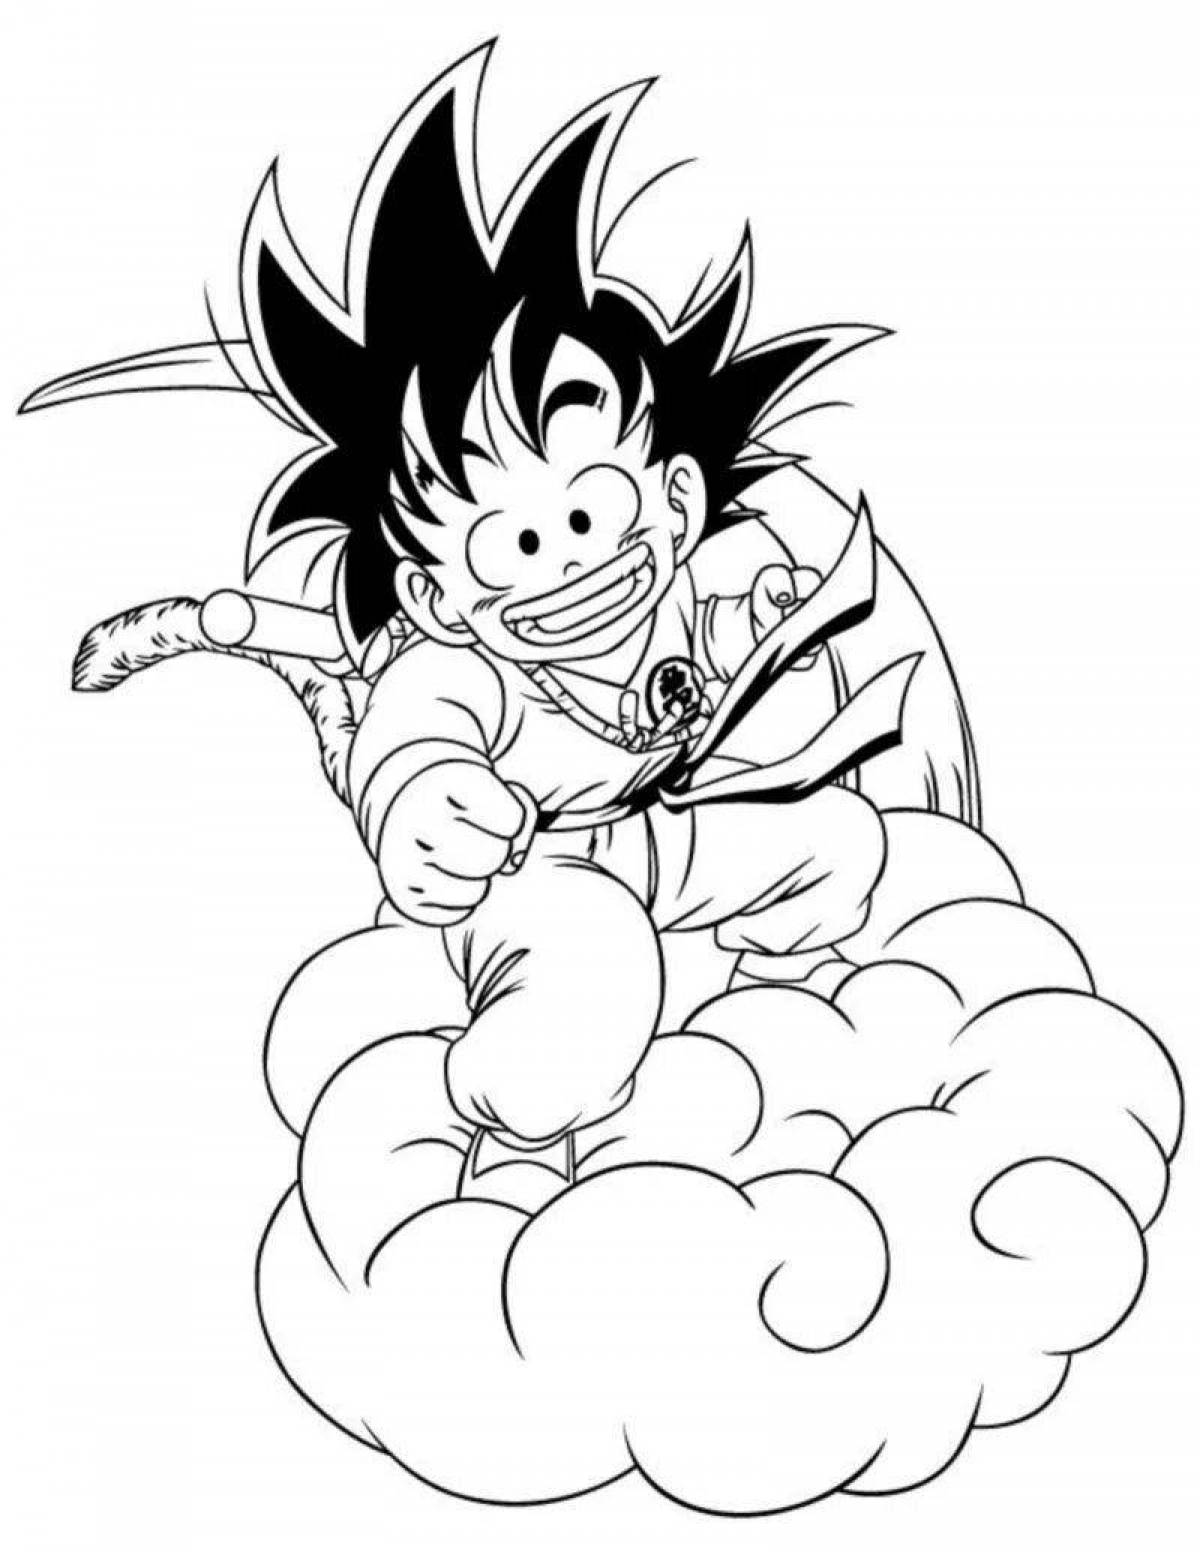 Coloring manly son goku